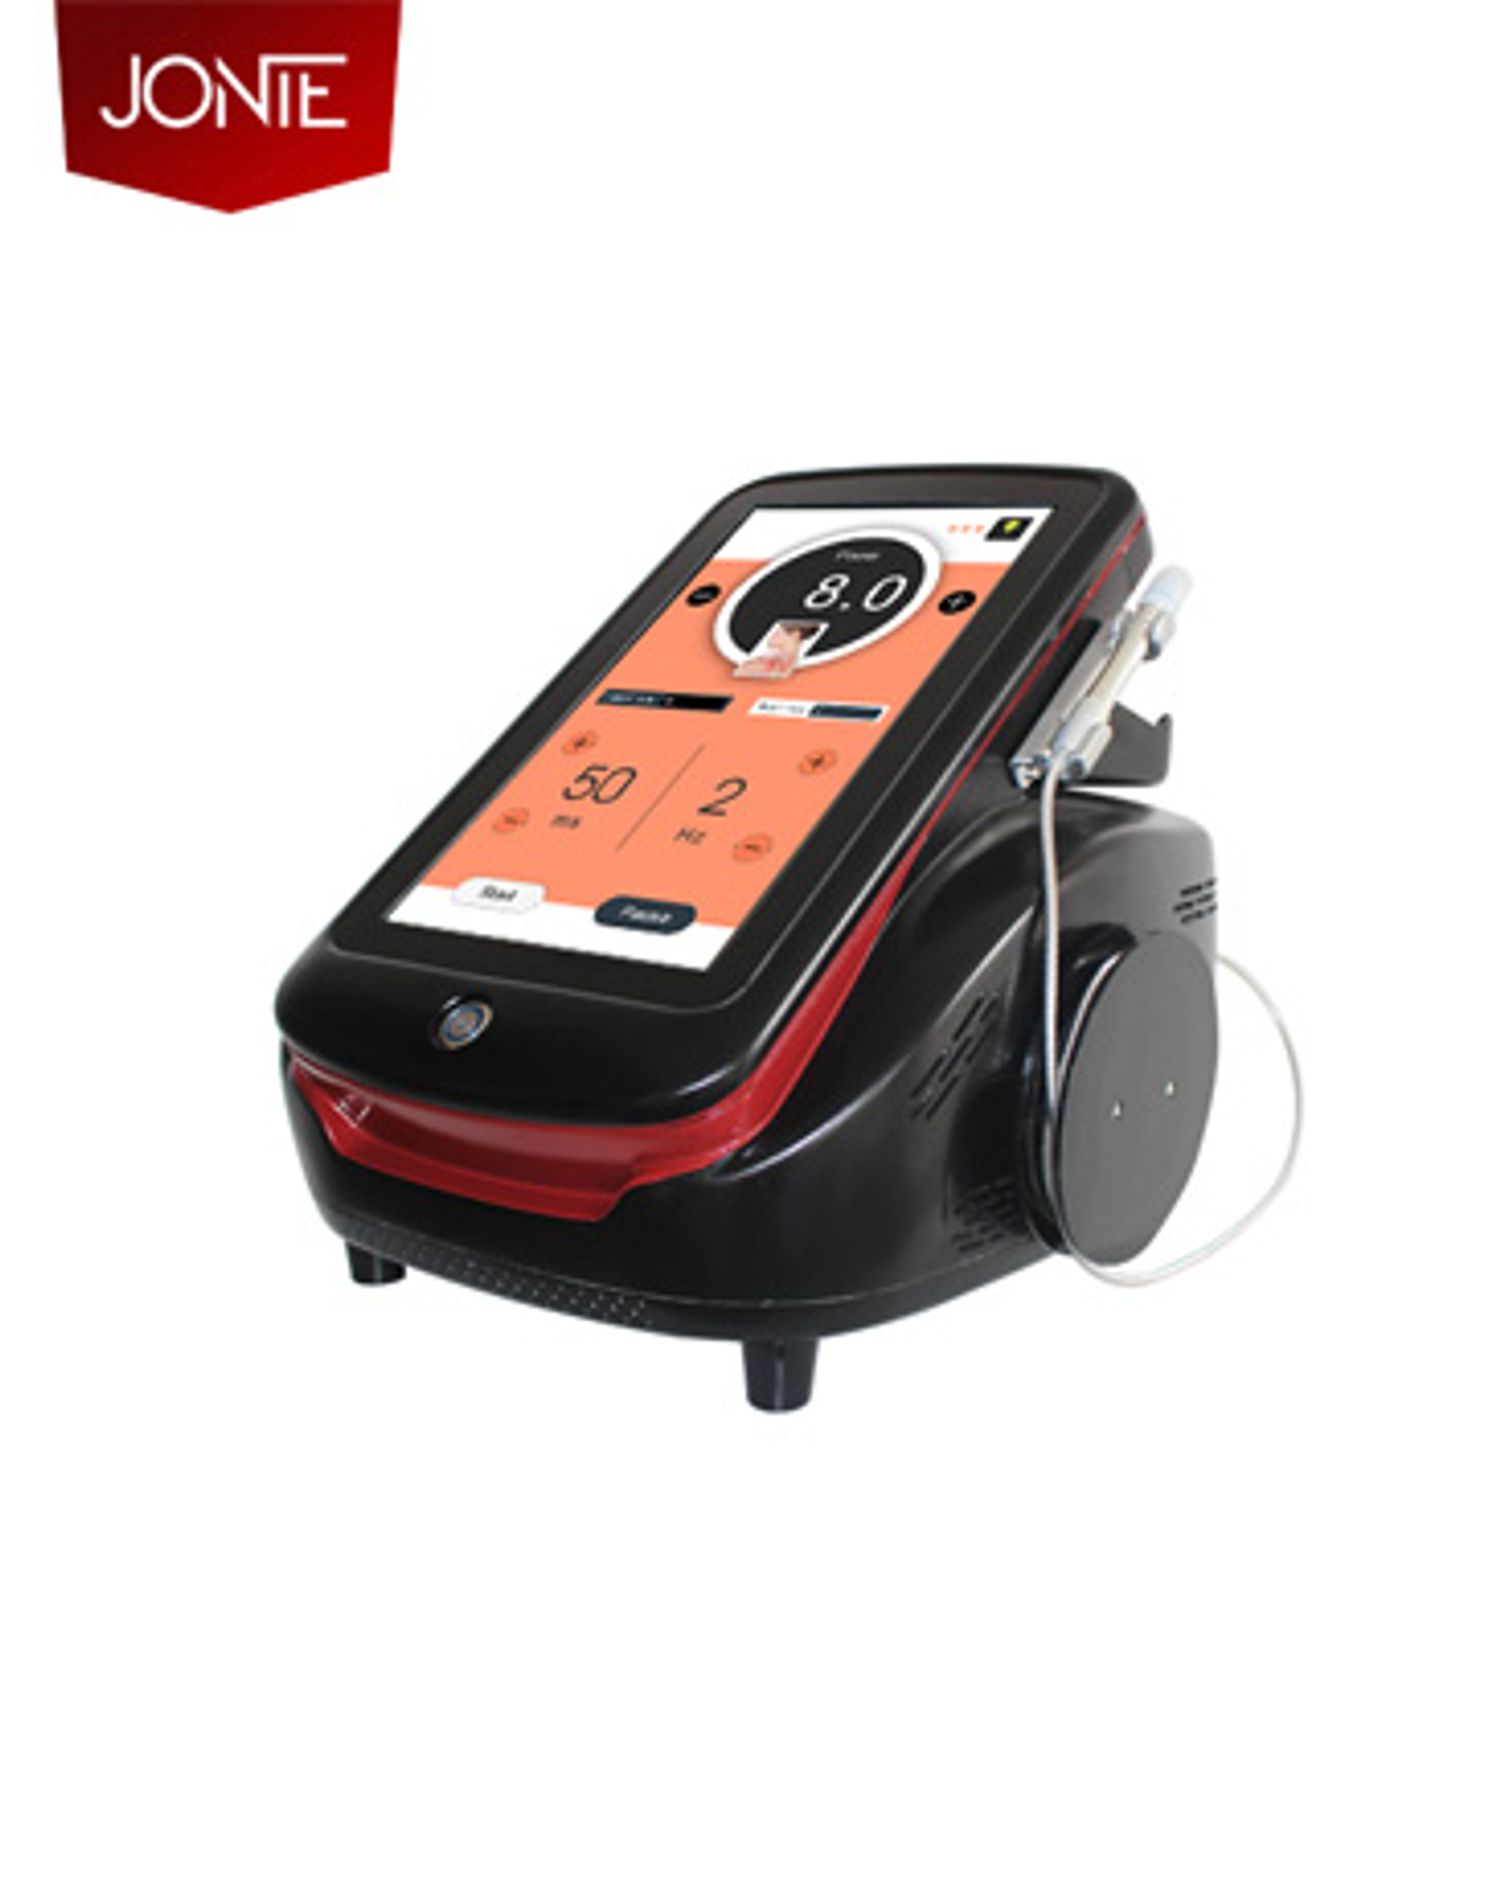 Jonte spider vein removal machine with a black and red color scheme